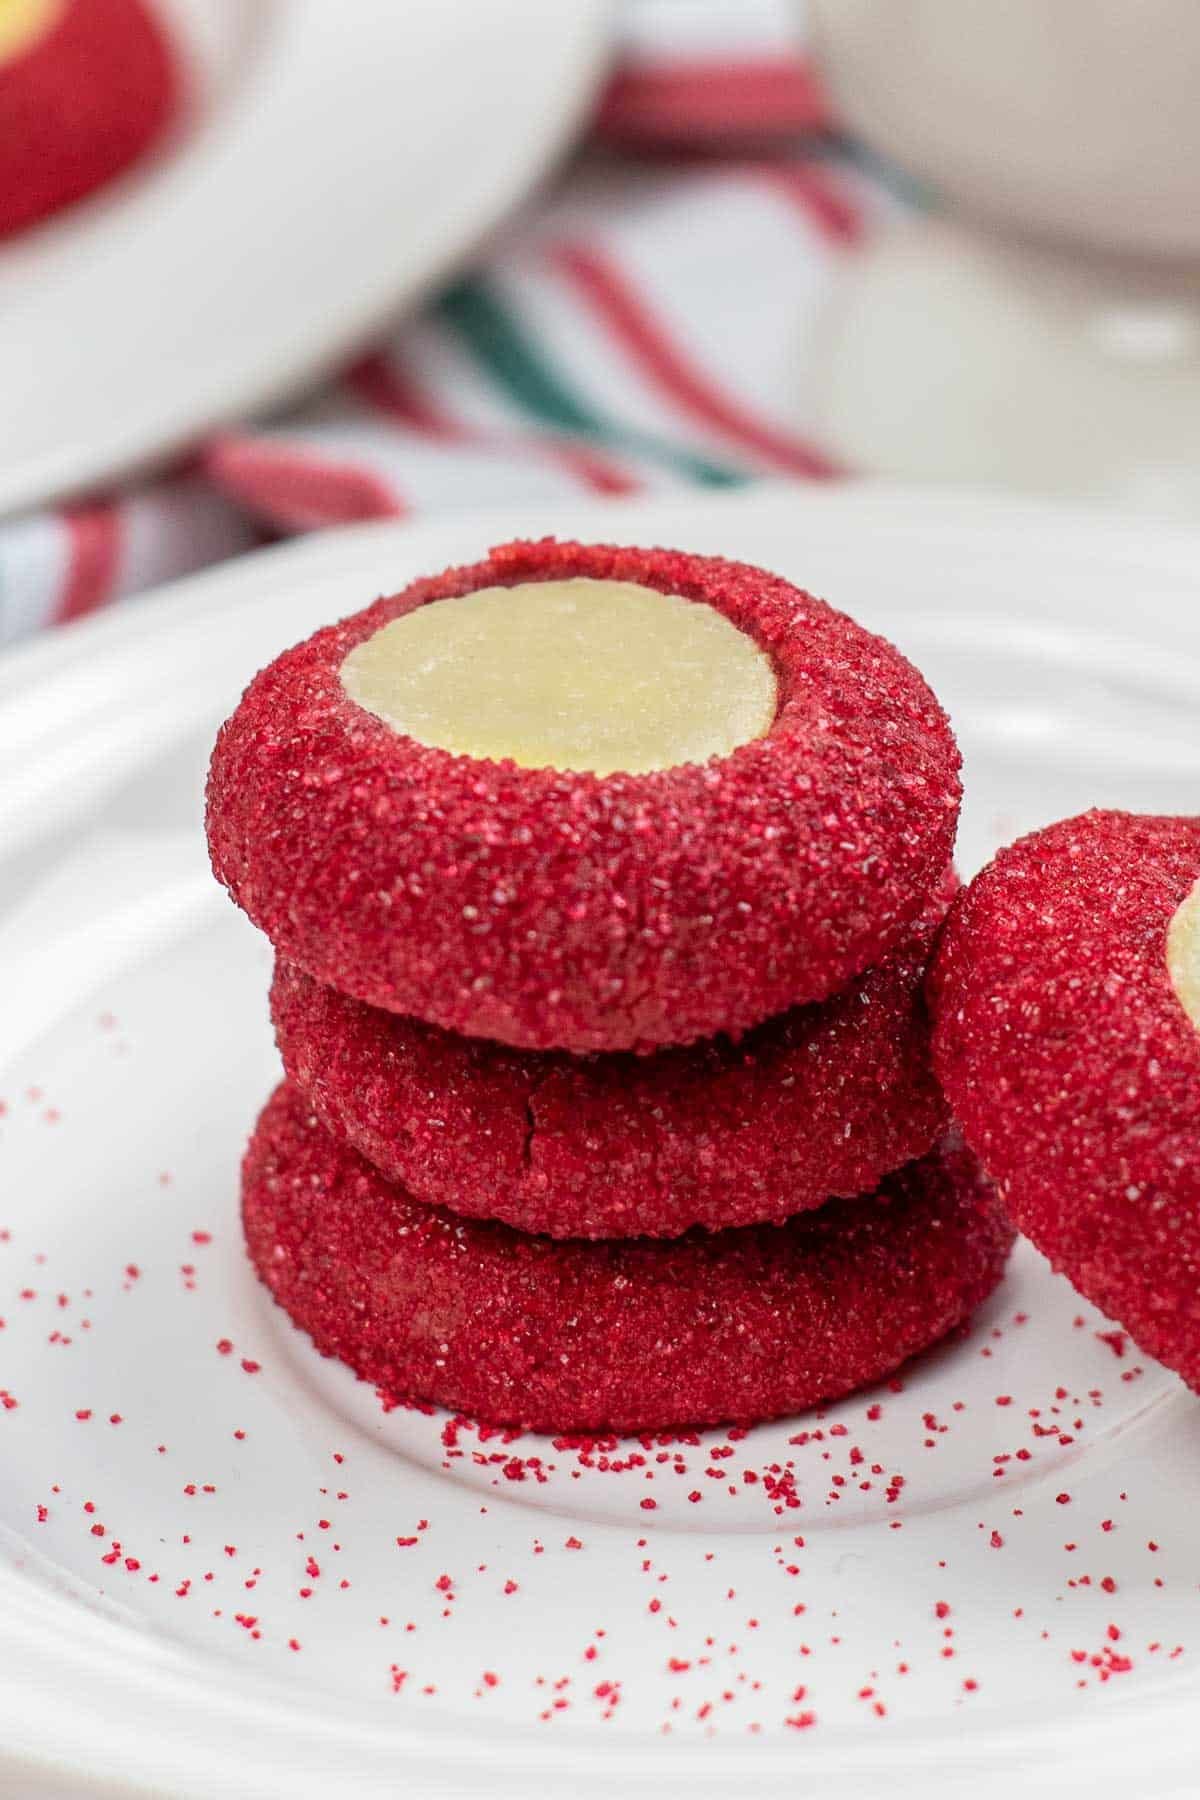 stack of three red sugar coated red velvet cookies with cream cheese mixture in the center.